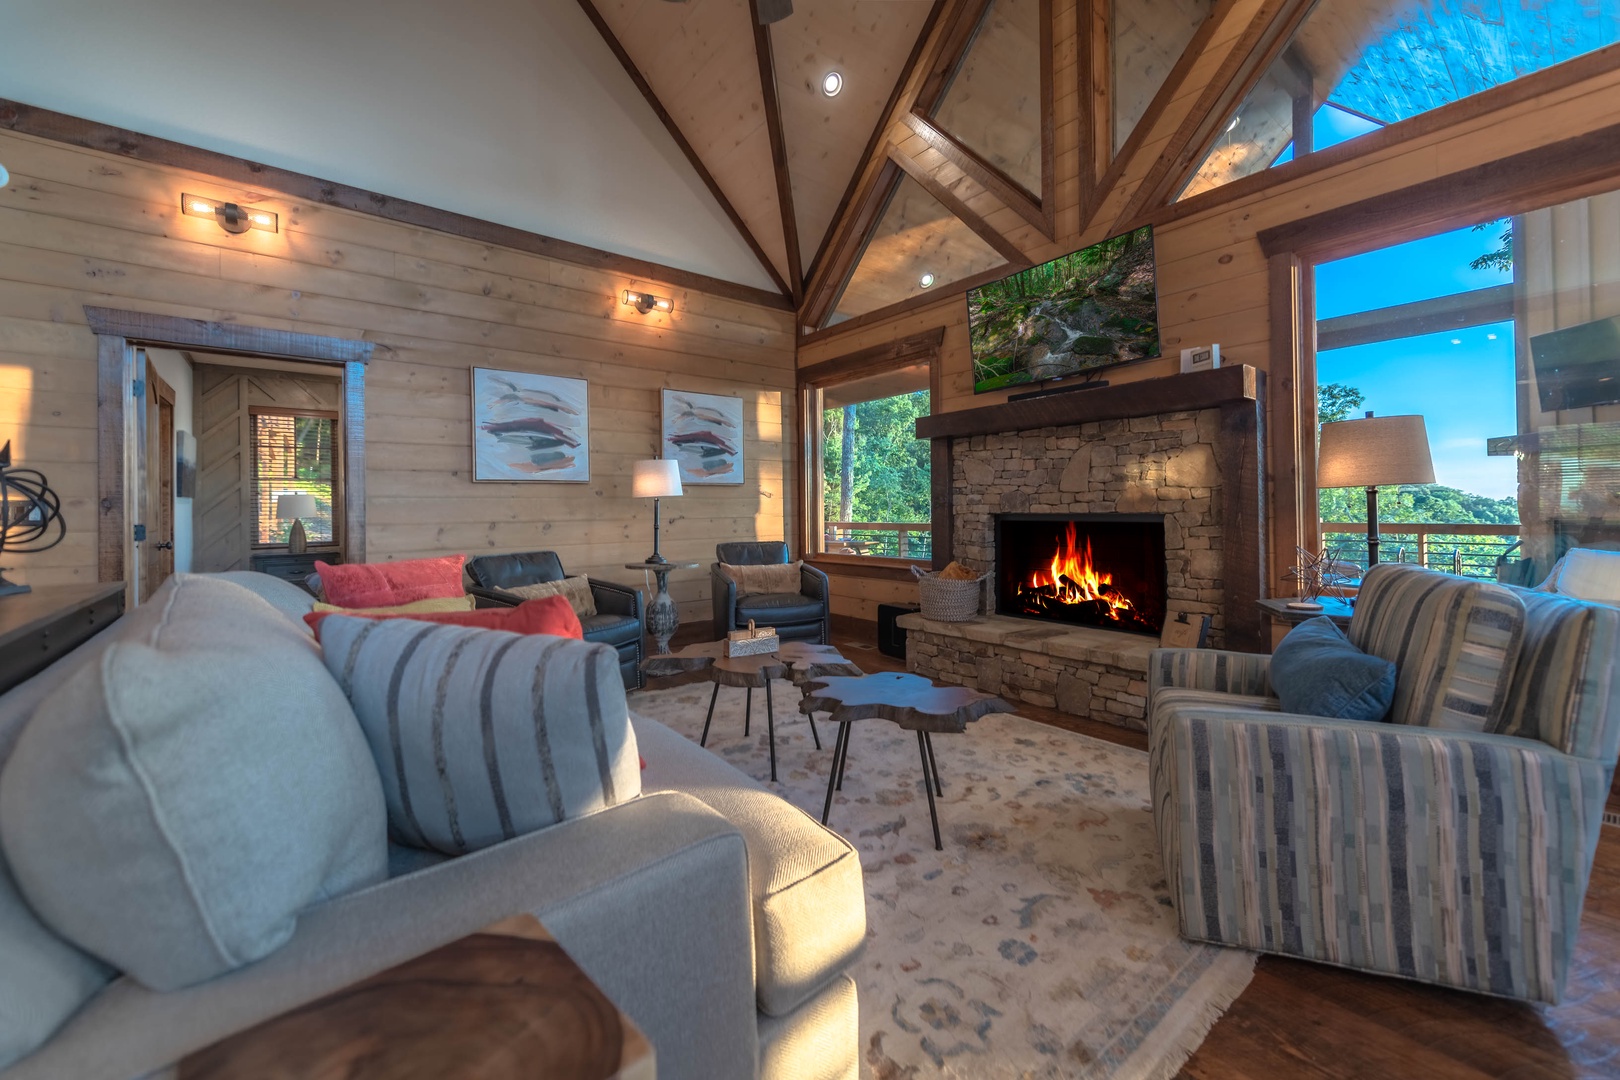 Southern Star- Living room area with mountain views through the large windows